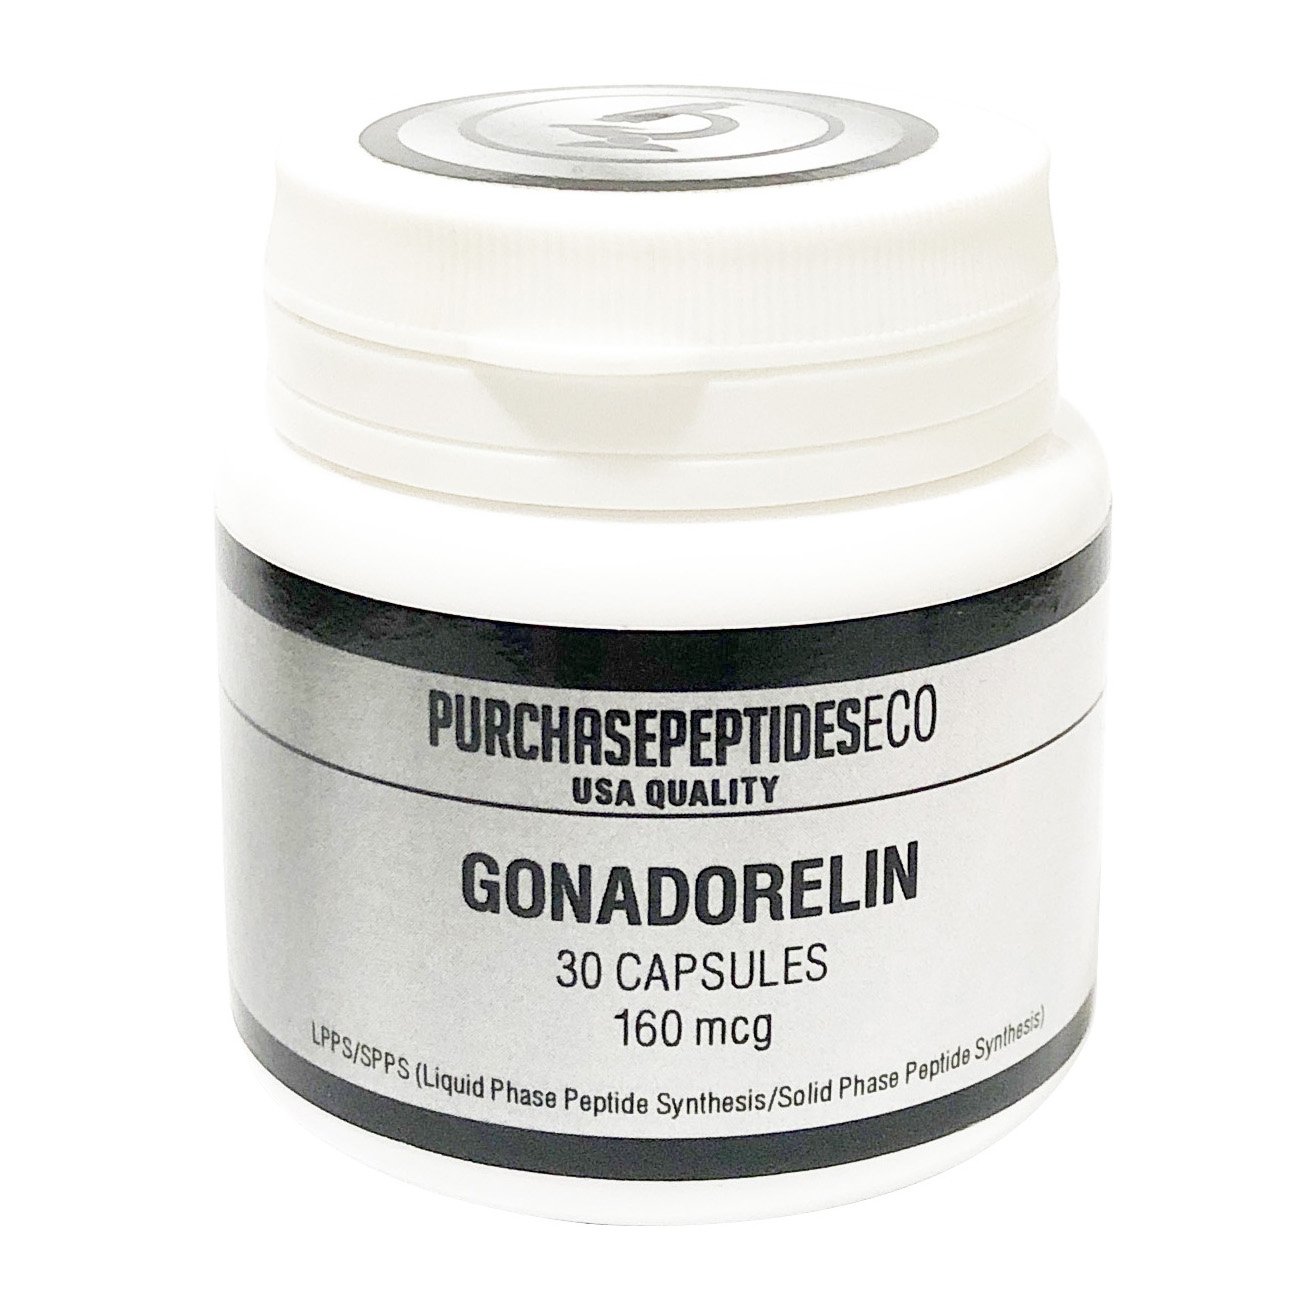 Gonadorelin капсулы,  ml, PurchasepeptidesEco. Peptides. 